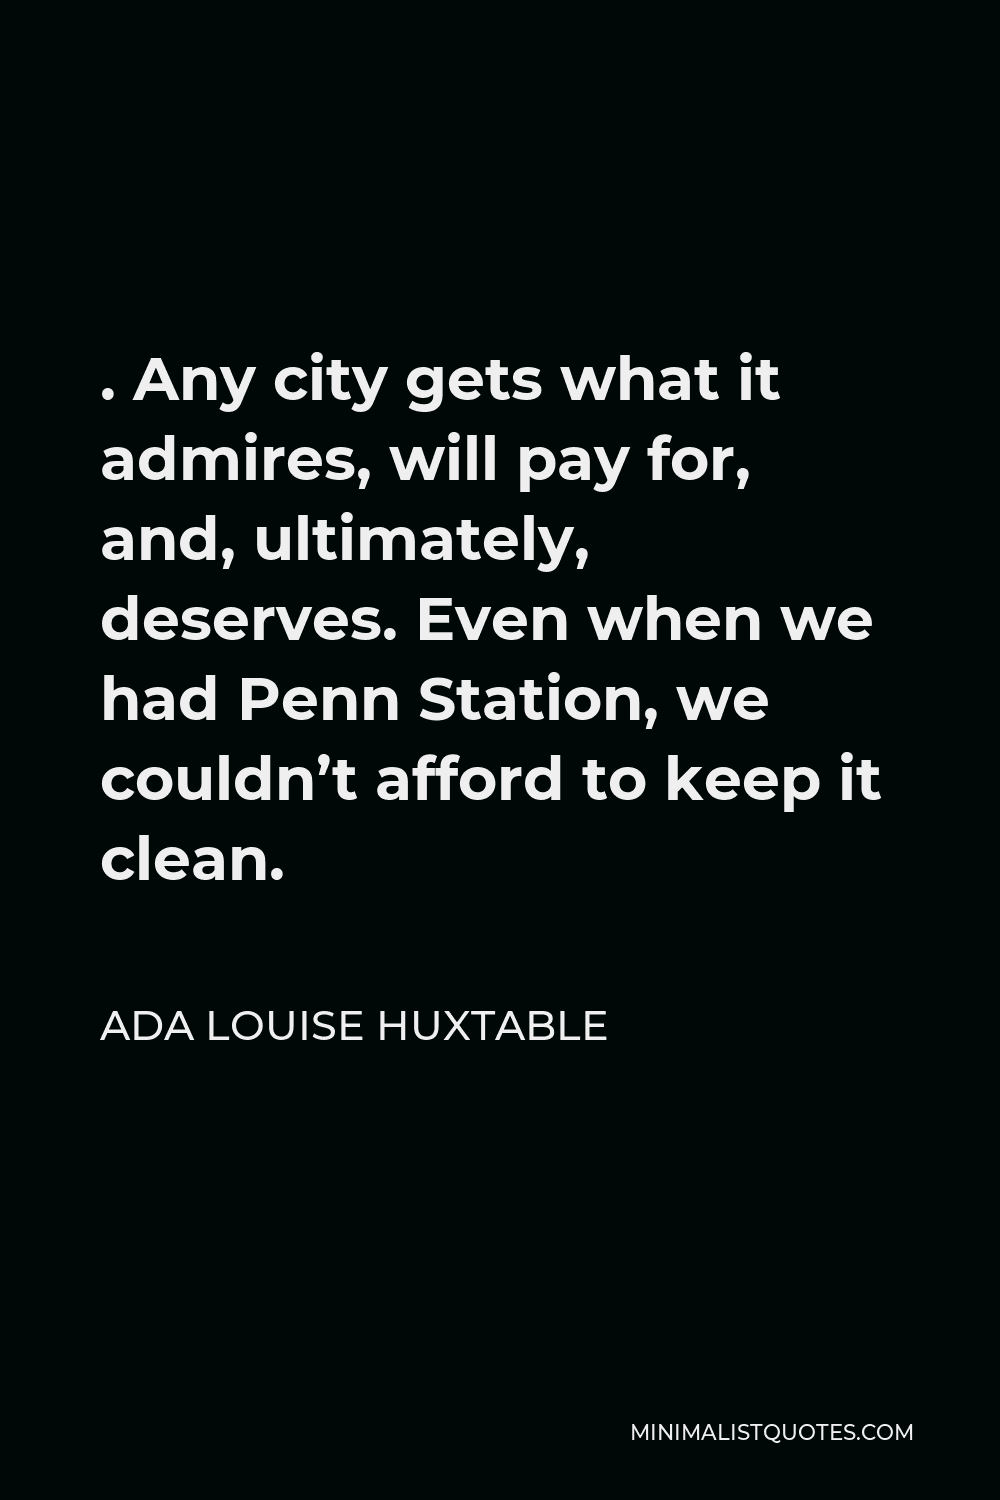 Ada Louise Huxtable Quote - . Any city gets what it admires, will pay for, and, ultimately, deserves. Even when we had Penn Station, we couldn’t afford to keep it clean.